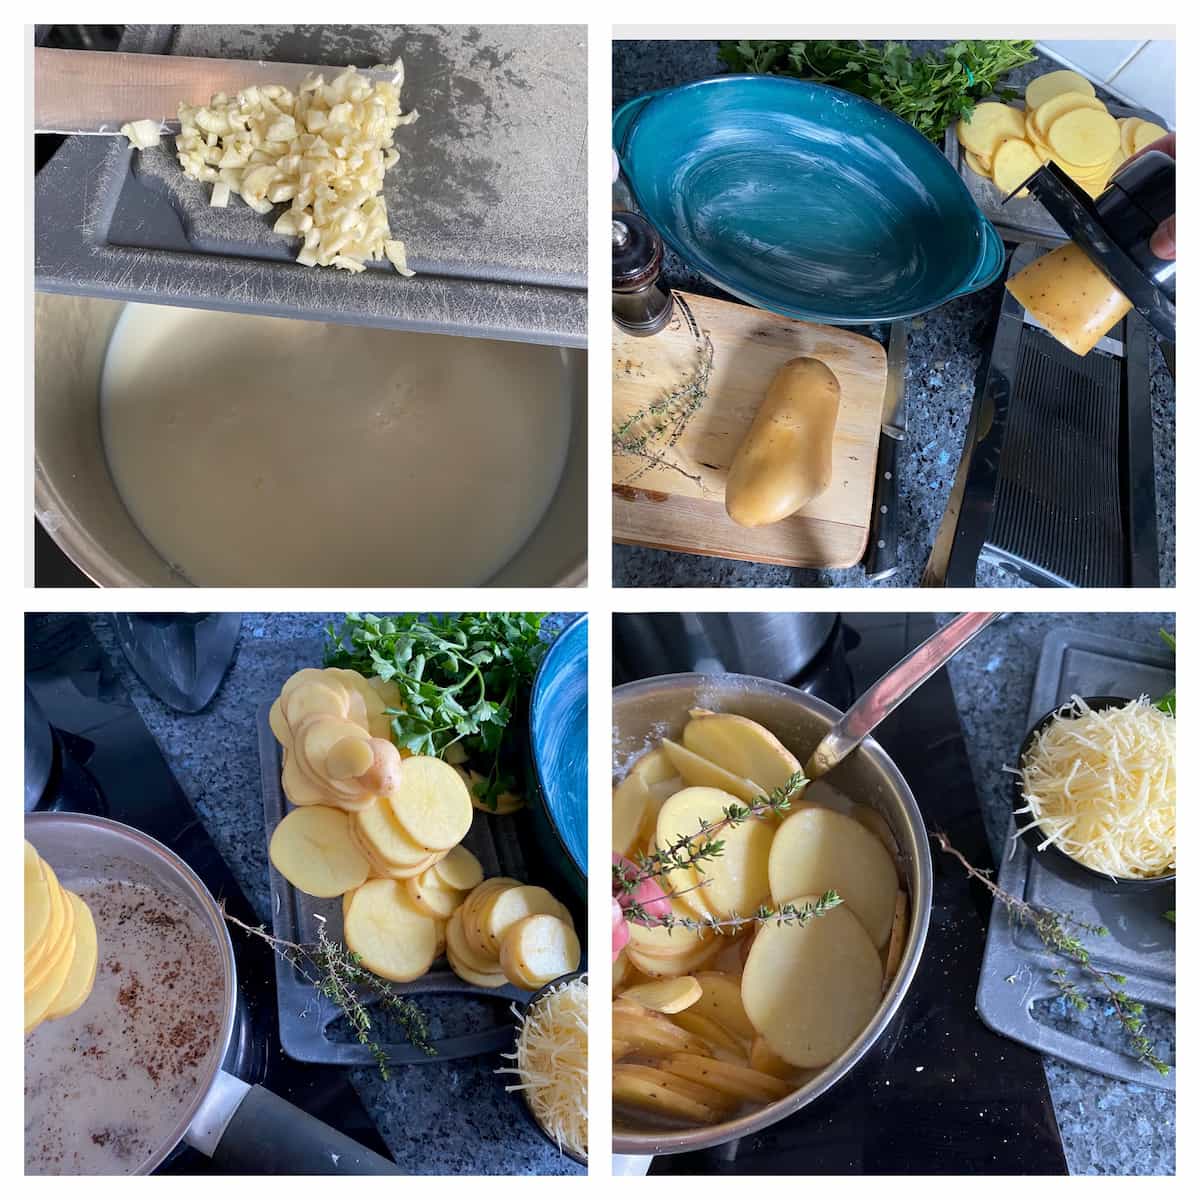 4 steps in making a potato gratin with cream and chopped garlic